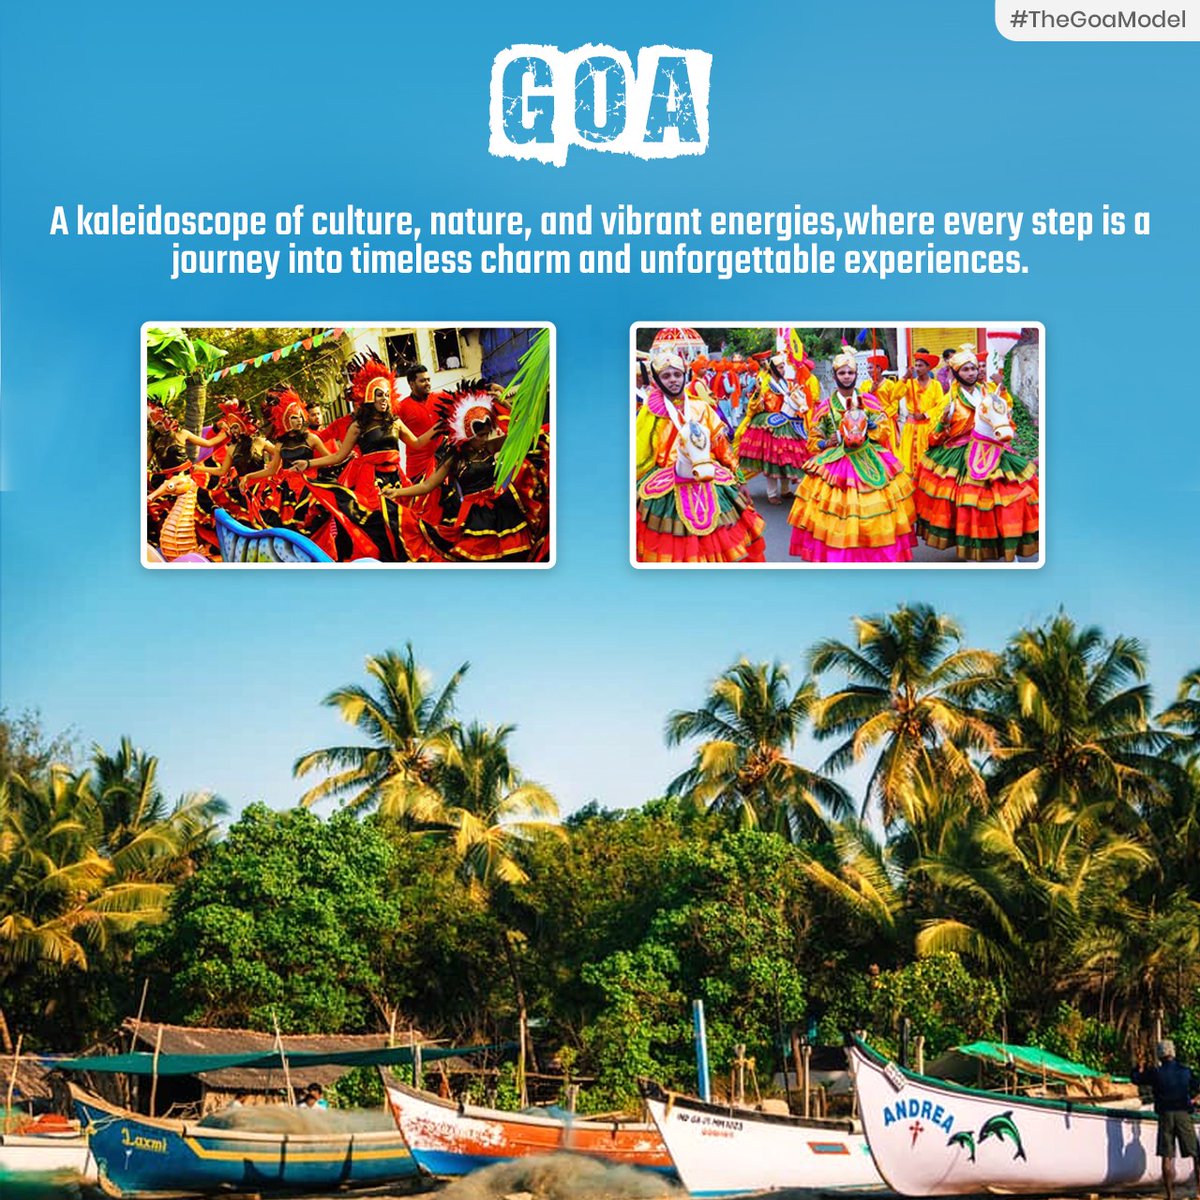 Goa: A kaleidoscope of culture, nature, and vibrant energies, where every step is a journey into timeless charm and unforgettable experiences.
#TheGoaModel
#Goa #Culture #Nature  #UnforgettableExperiences #TravelGoa #ExploreGoa #GoaVibes #TravelDestination #CoastalBeauty